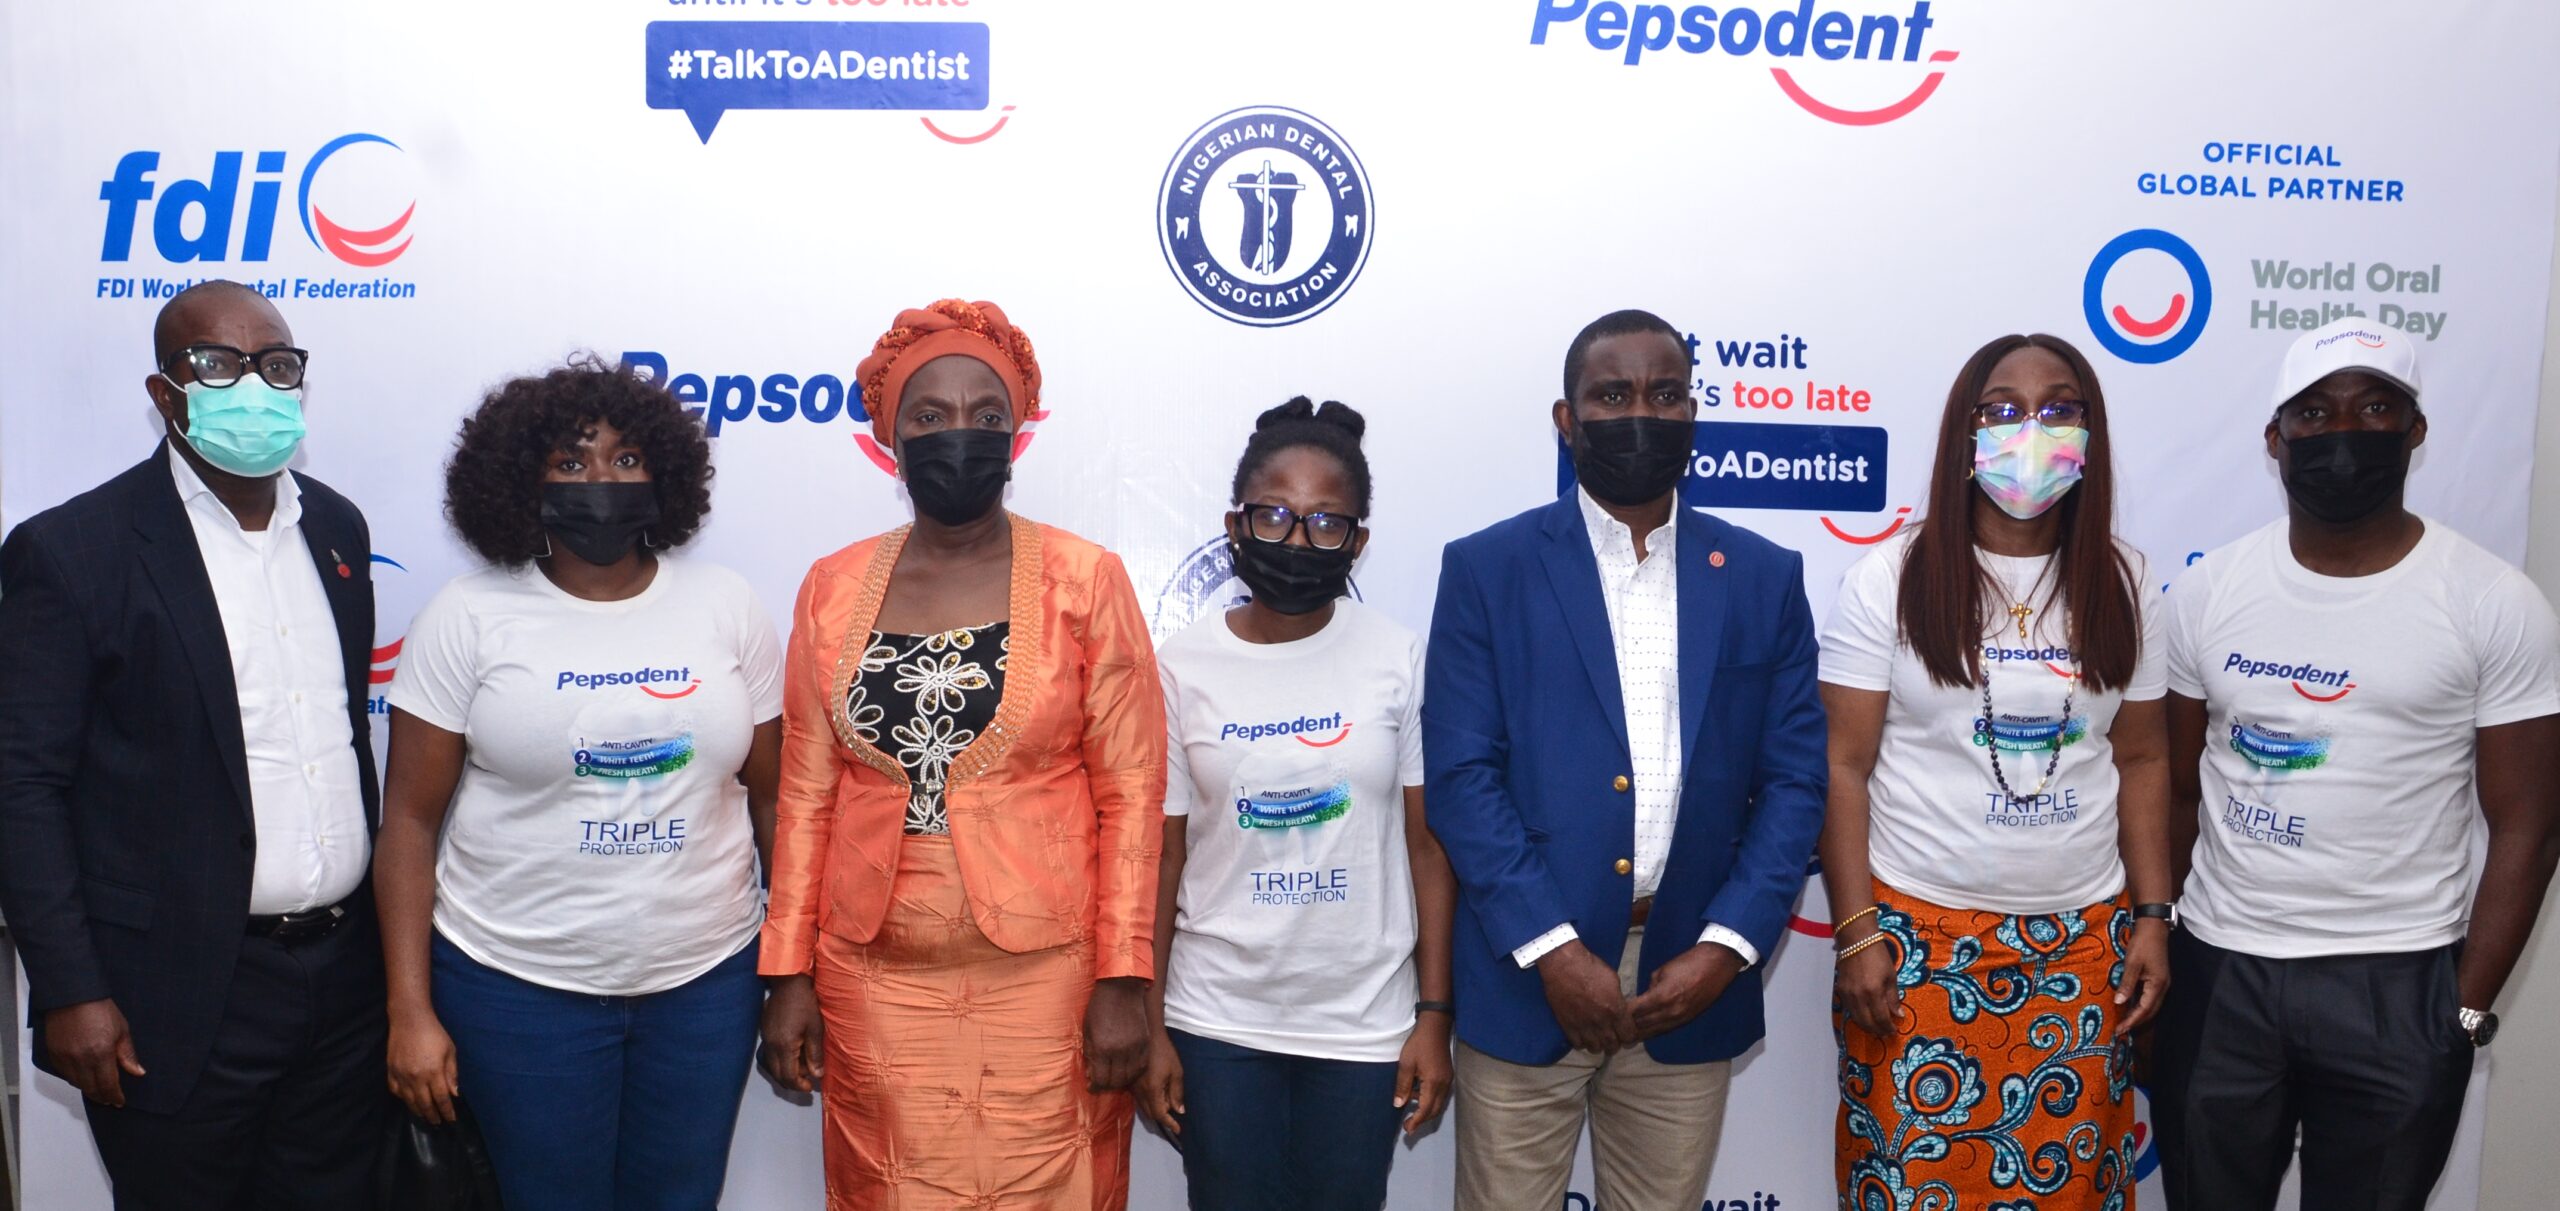 2022 World Oral Health Day: Pepsodent To Reach 1Million Children With Free Products And Oral Health Education